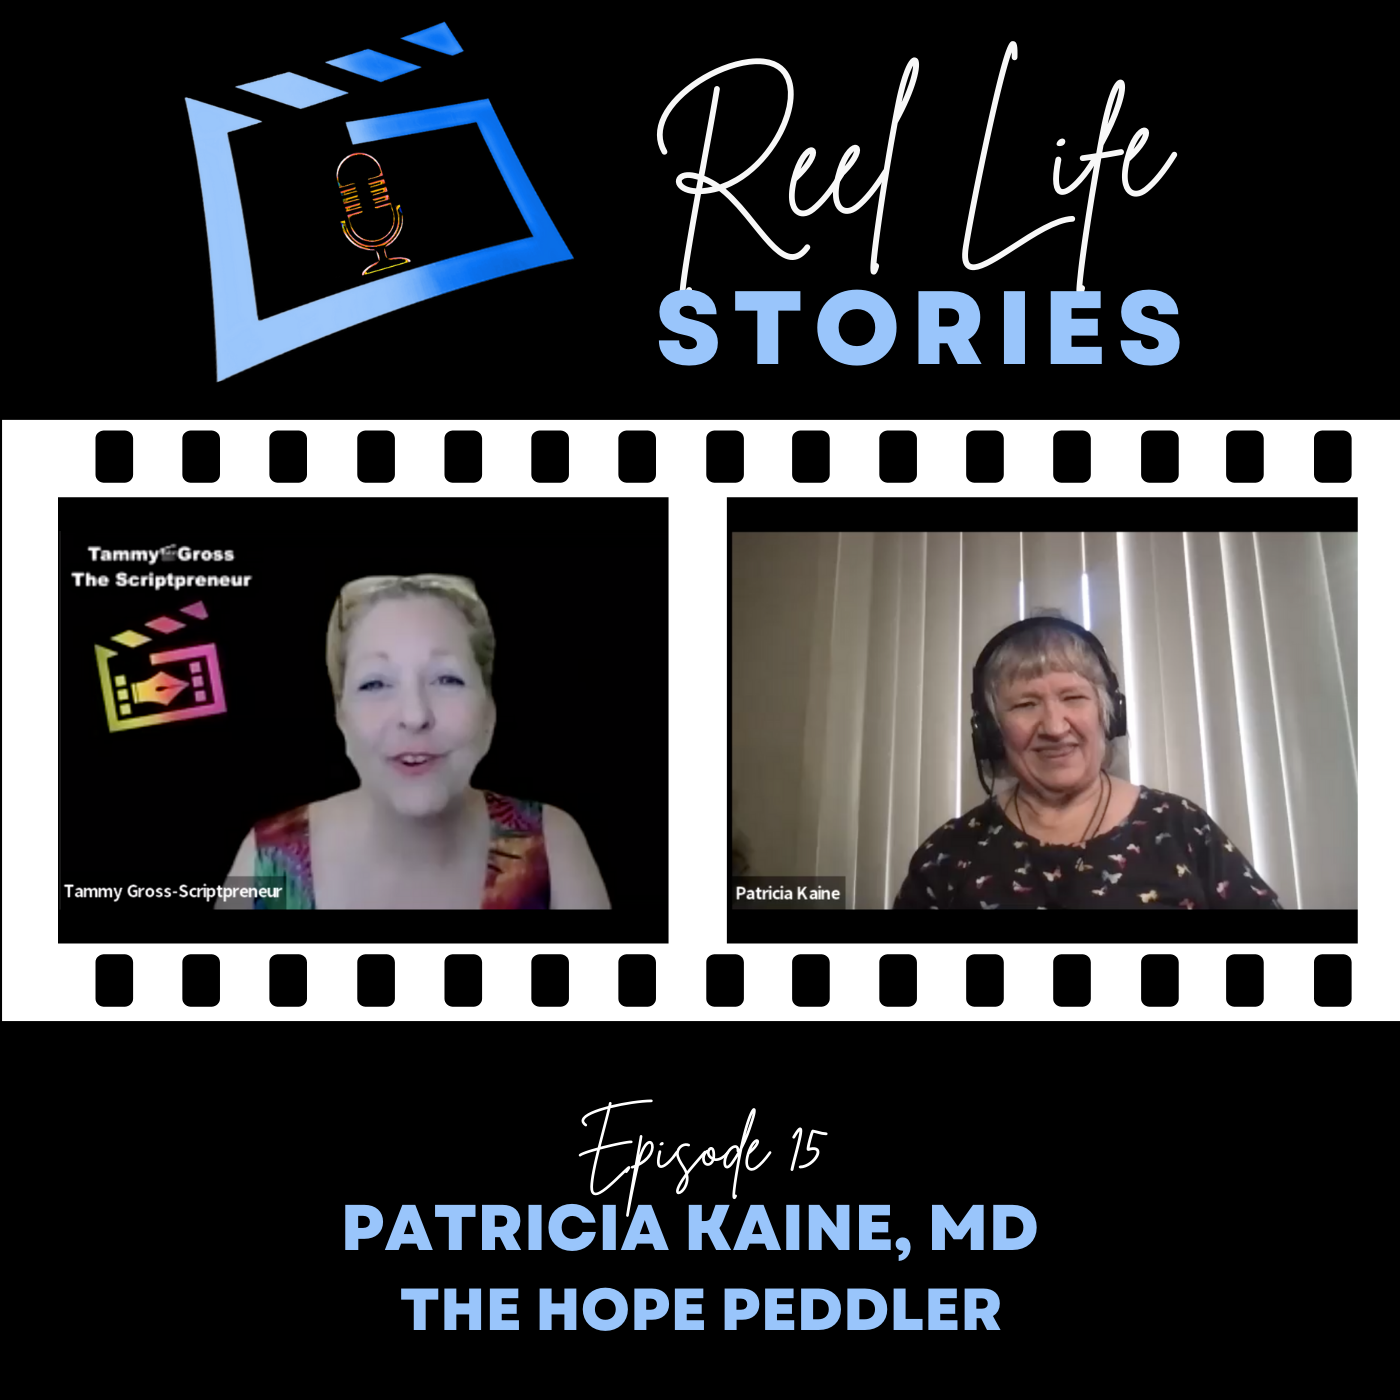 PATRICIA KAINE, MD - The Hope Peddler